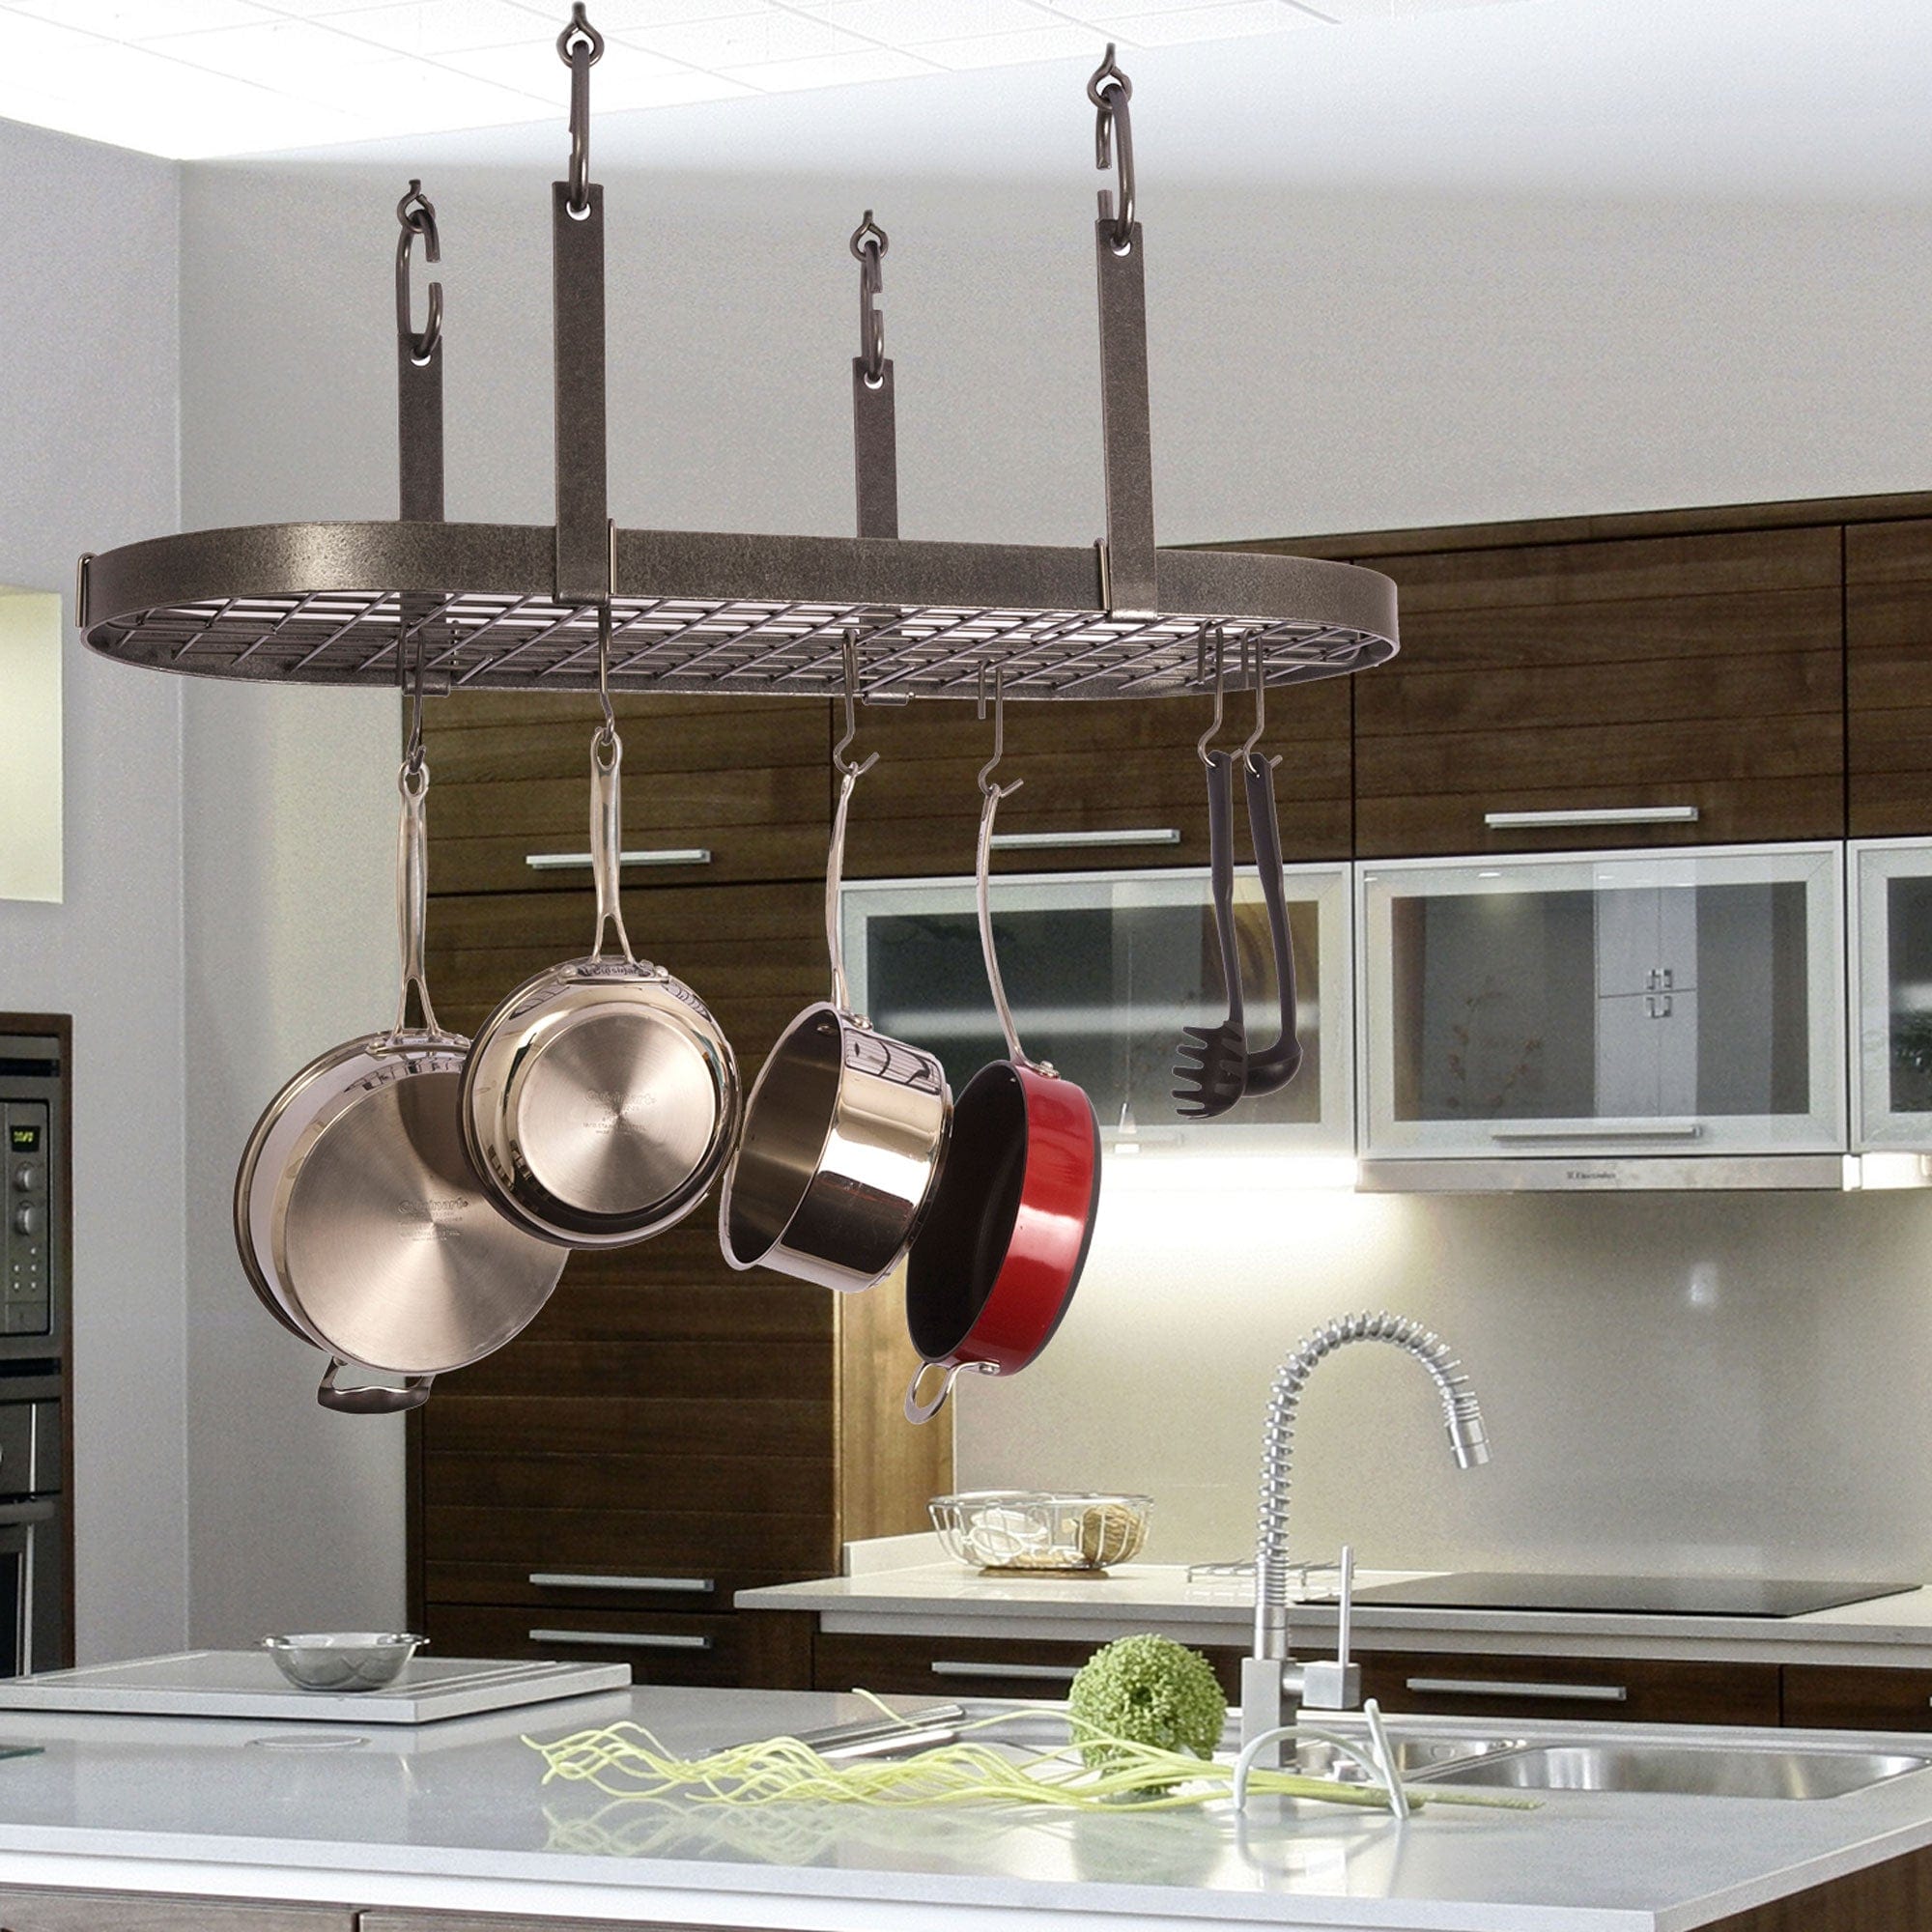 Enclume - All Bars Ceiling Pot Rack w/ 12 Hooks in Hammered Steel